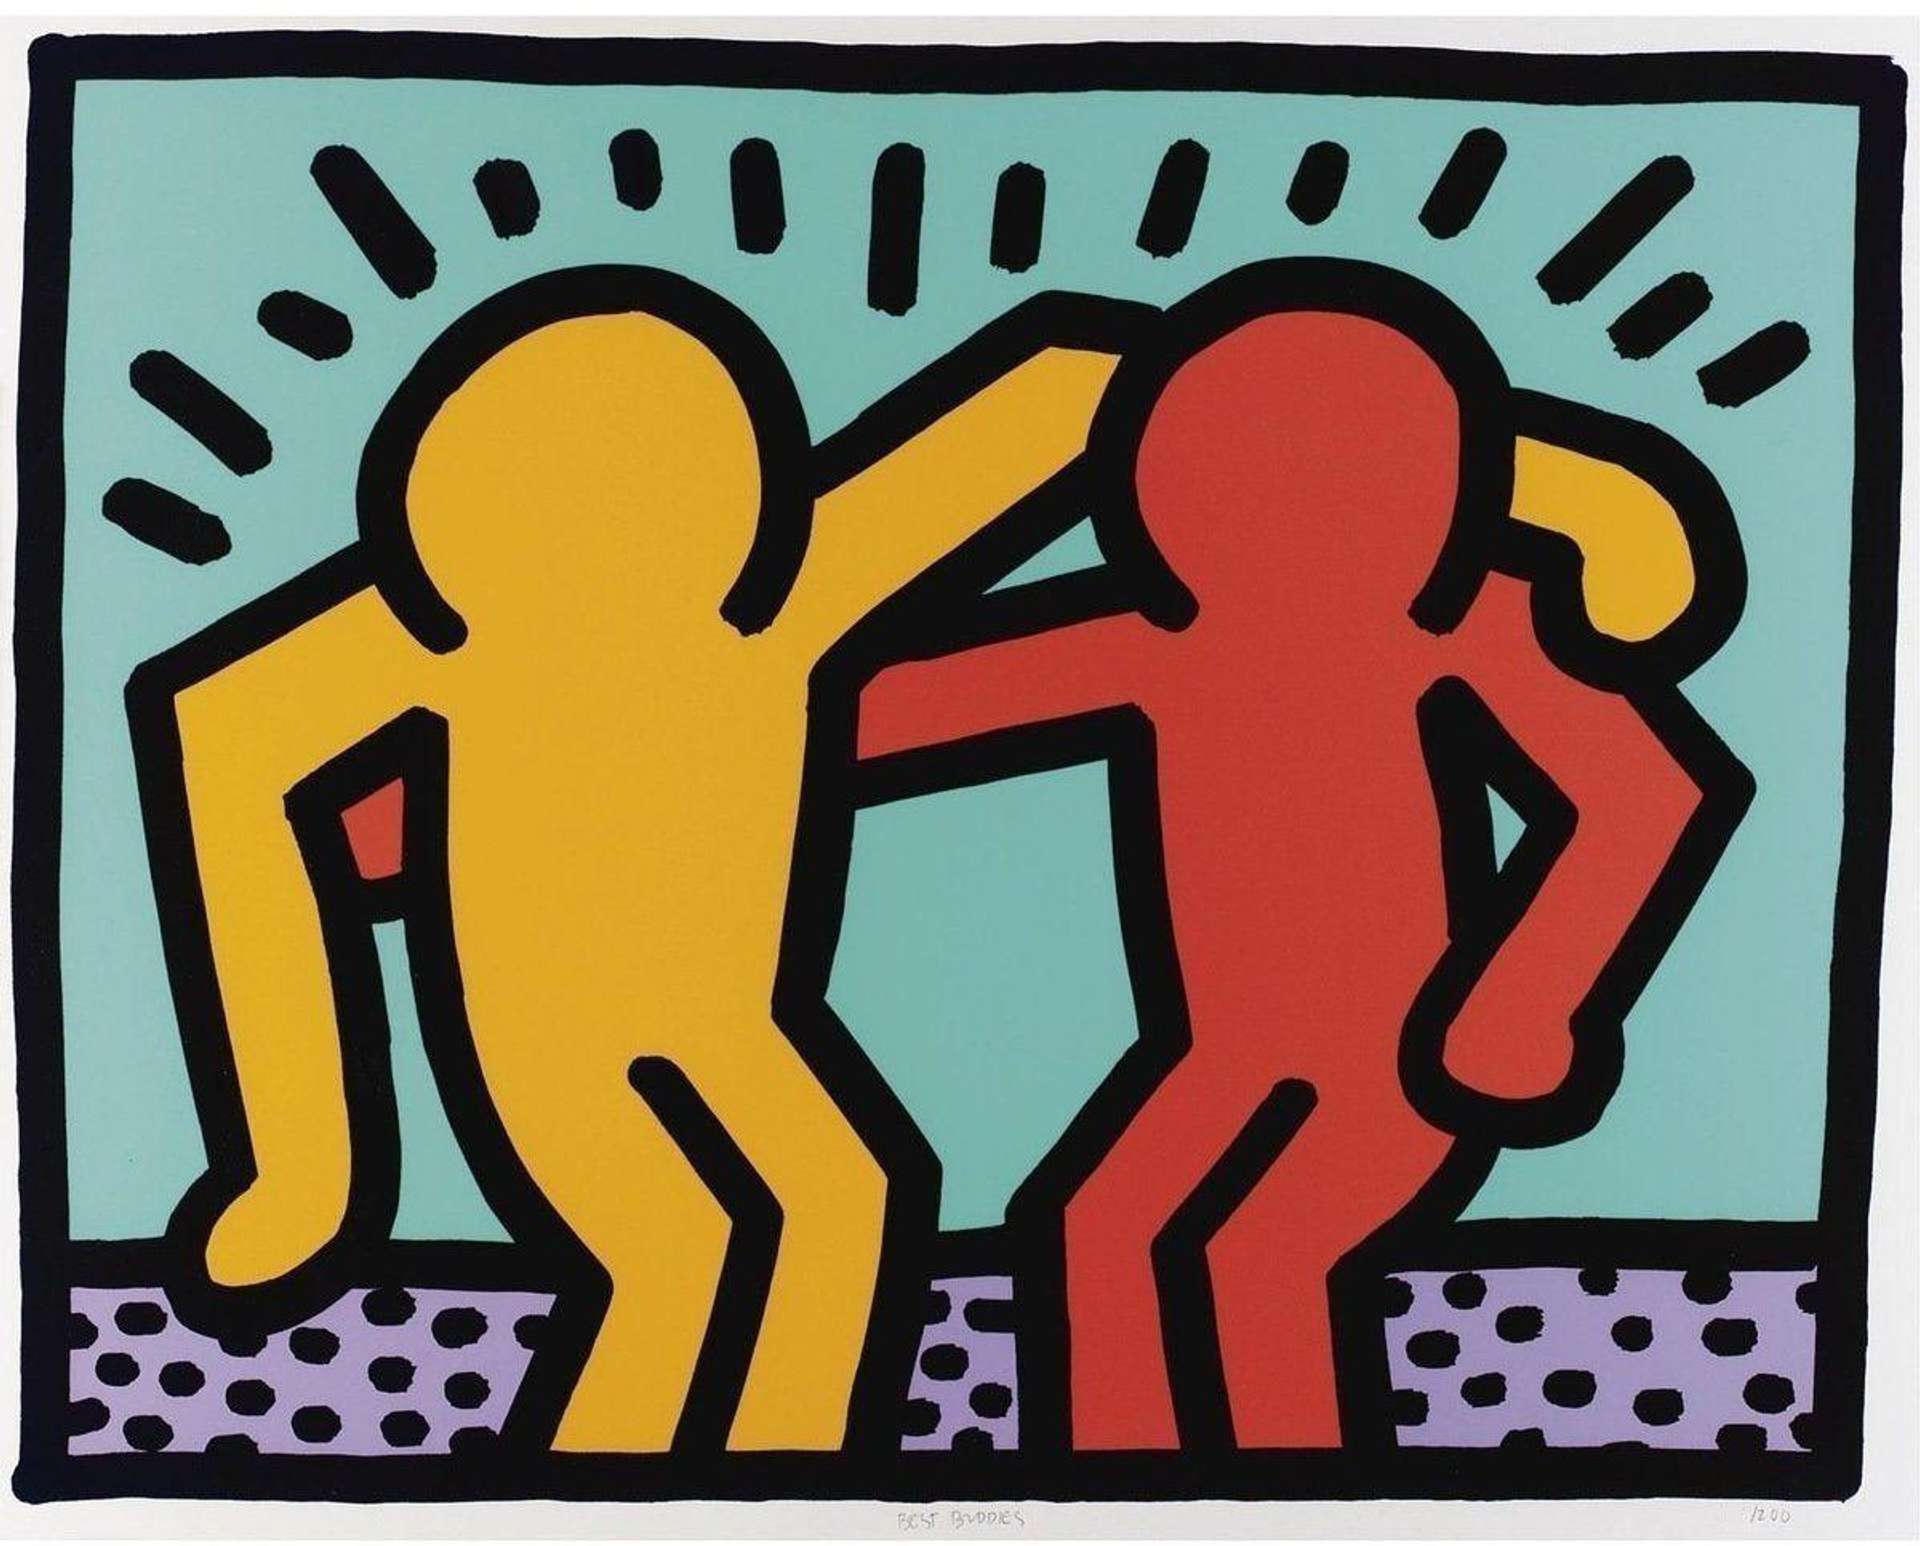 A screenprint by Keith Haring depicting two cartoonish figures, one in yellow and the other in red, embracing each other against a teal blue background with graphic black outlines.